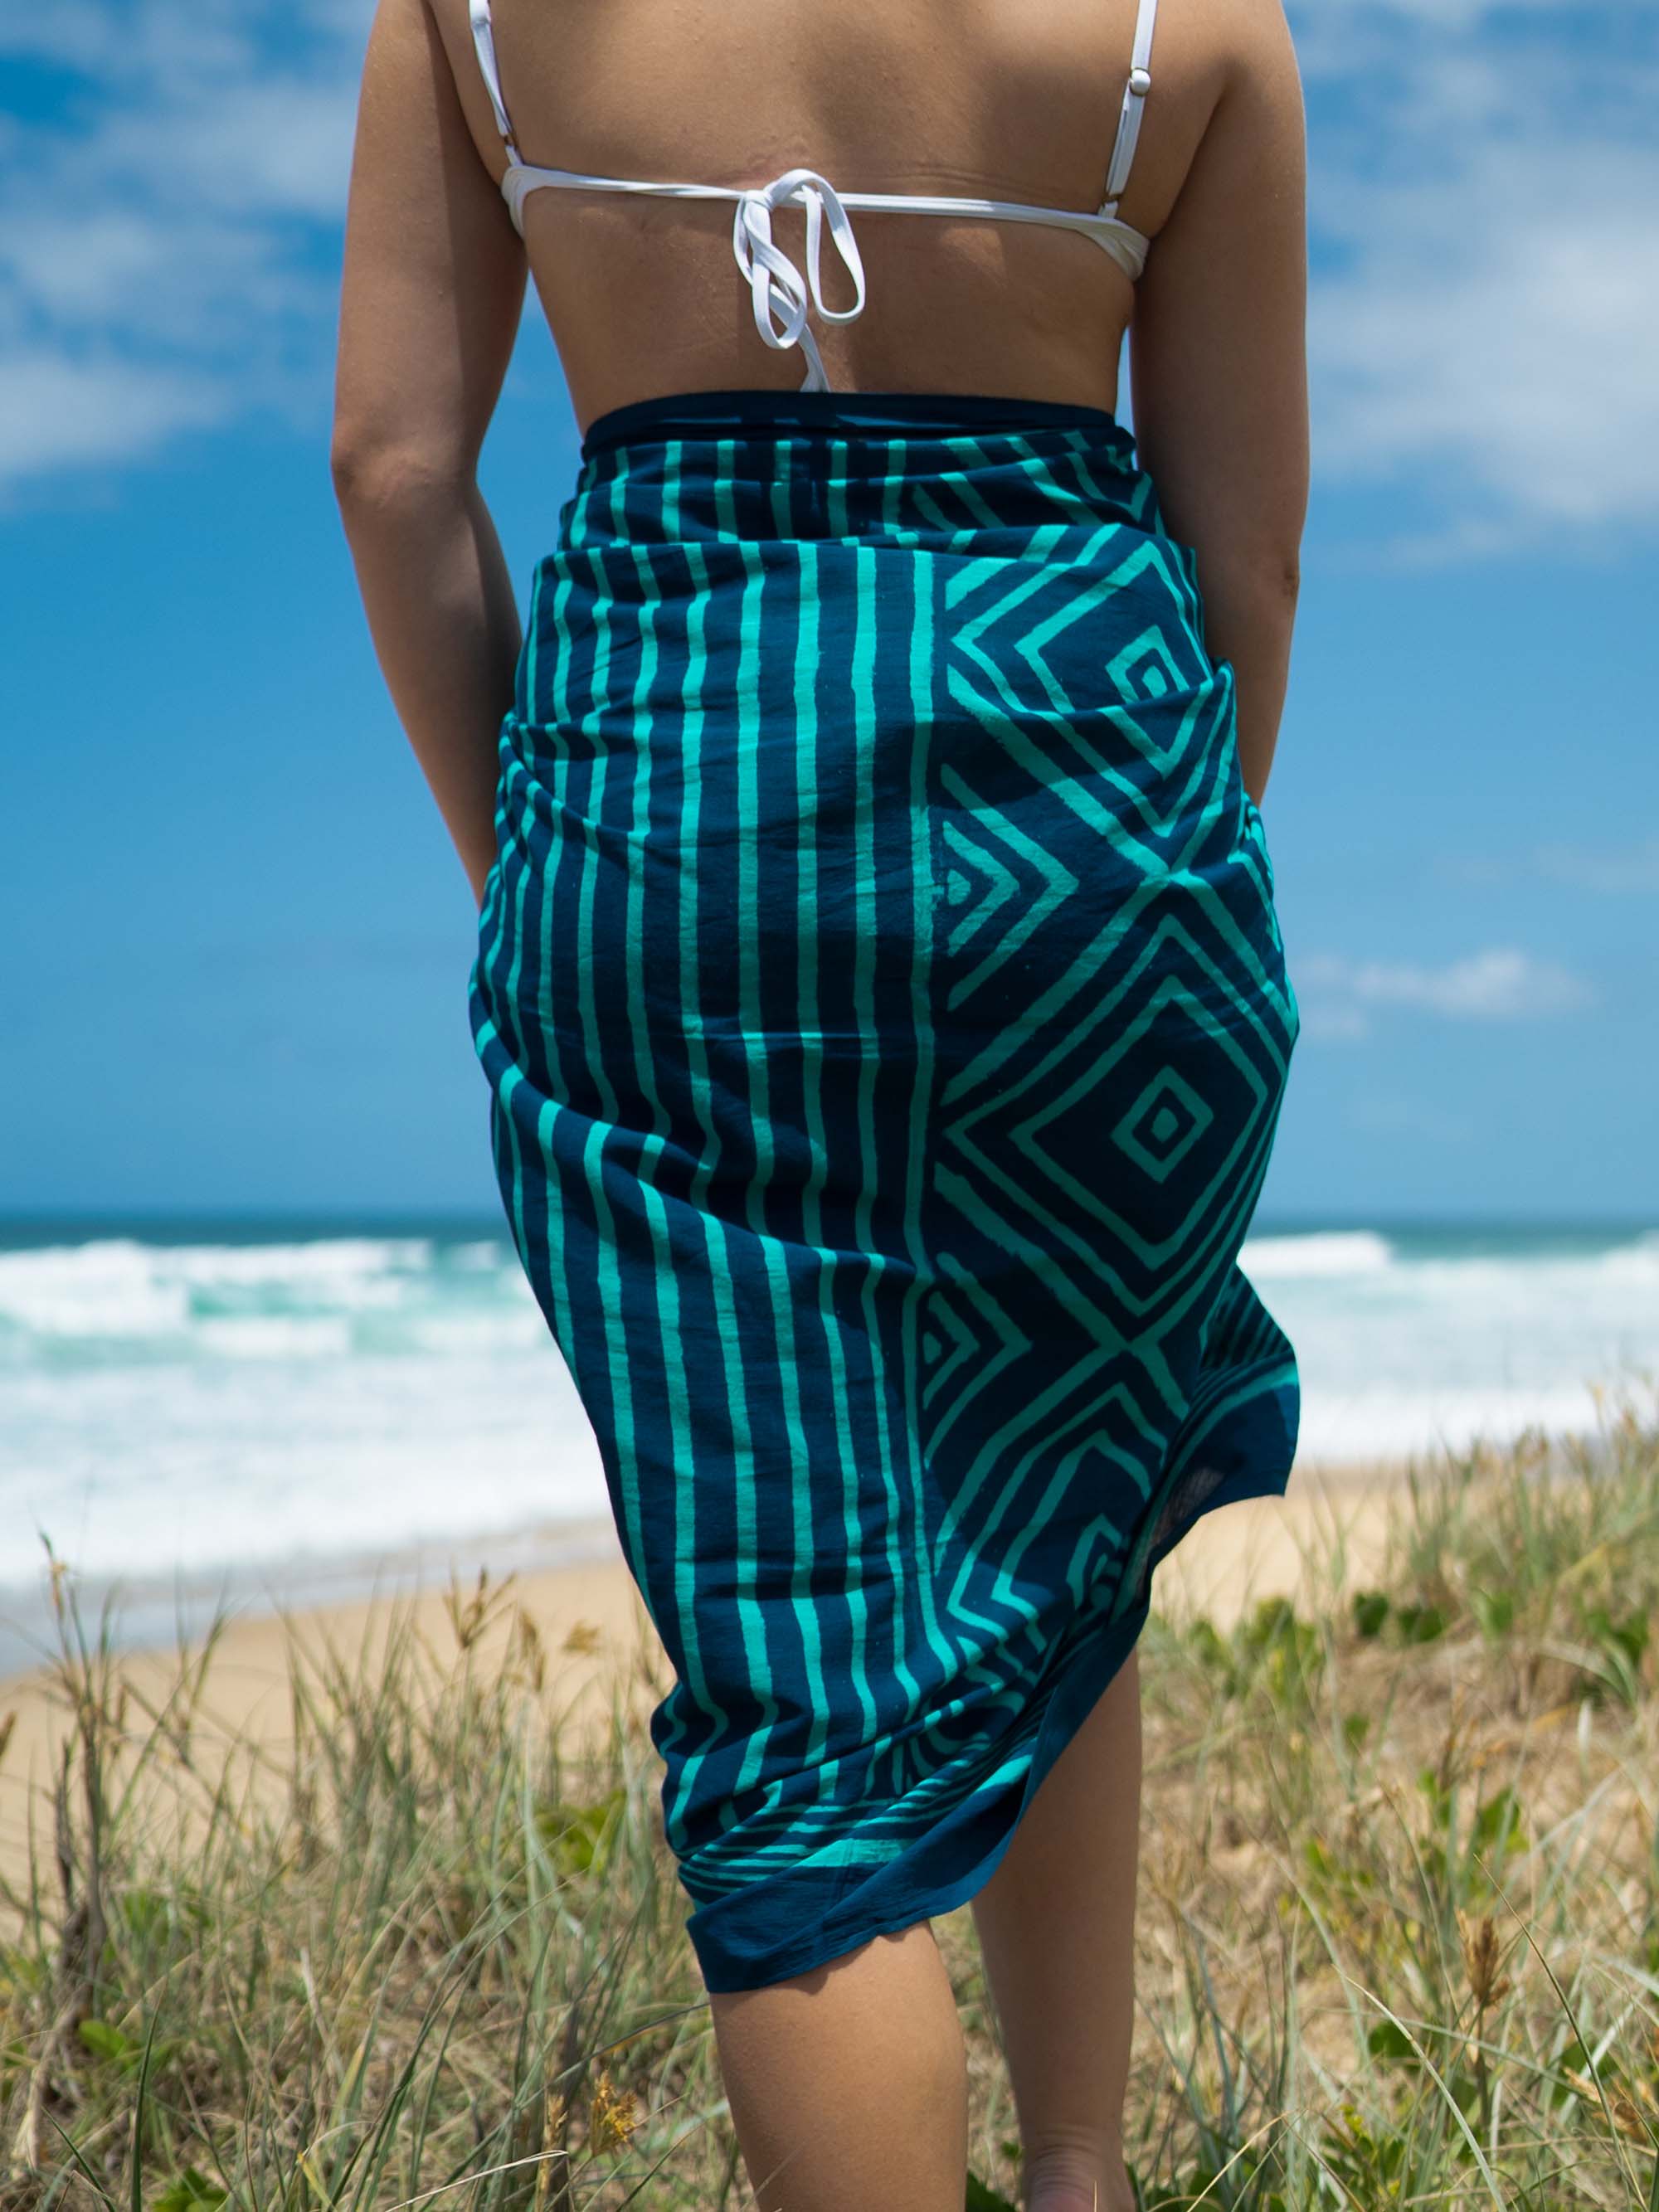 Plus Crinkle Cotton Sarong in Linear Bloom